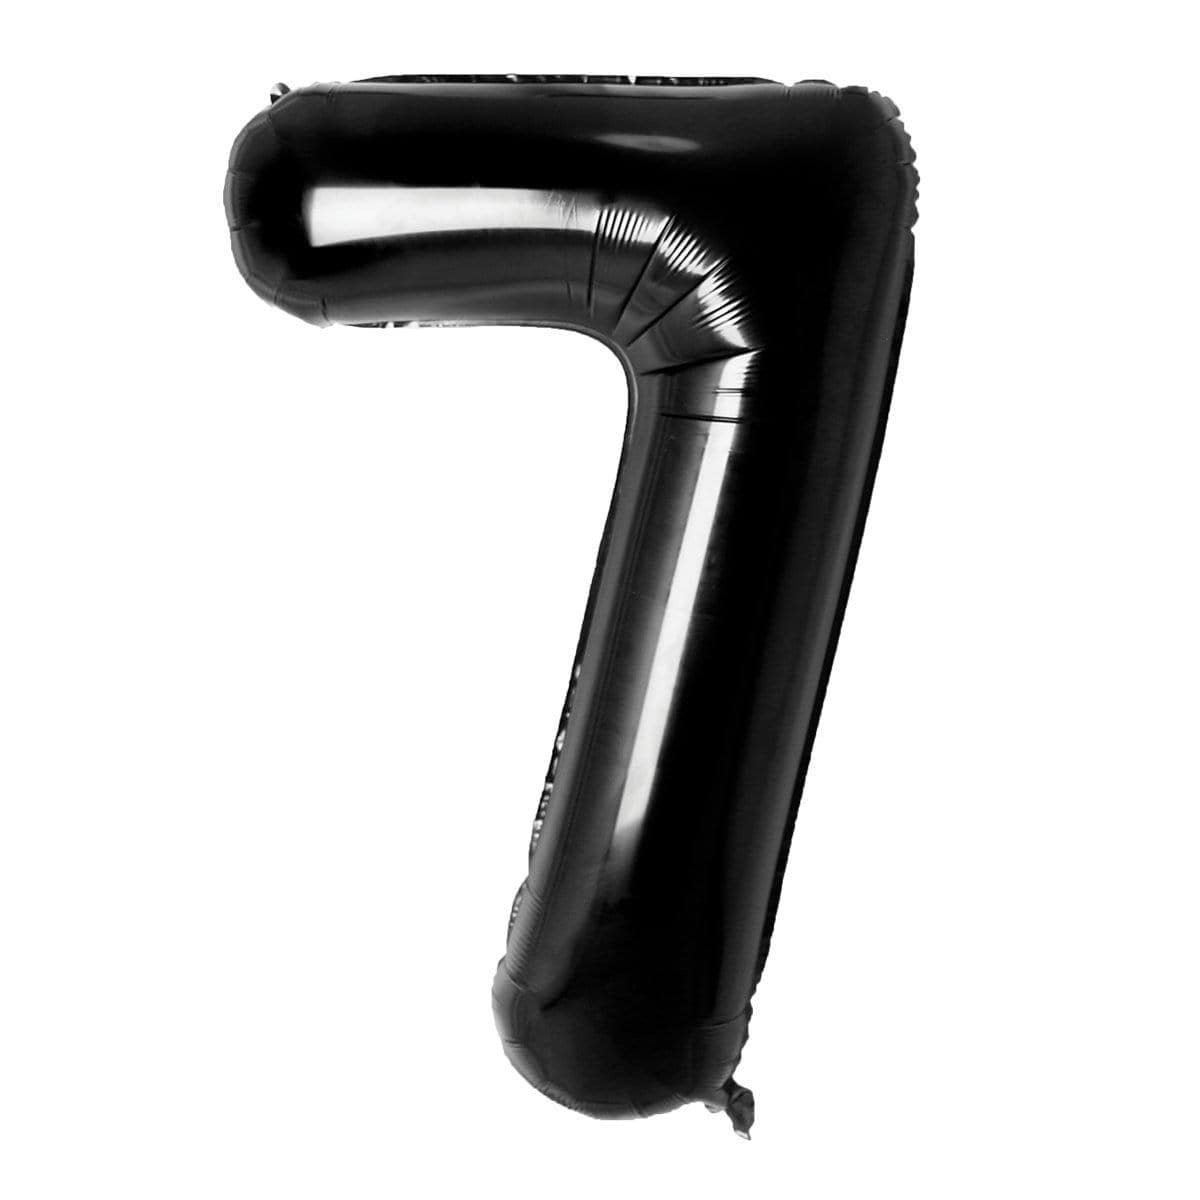 Buy Balloons Black Number 7 Foil Balloon, 34 Inches sold at Party Expert